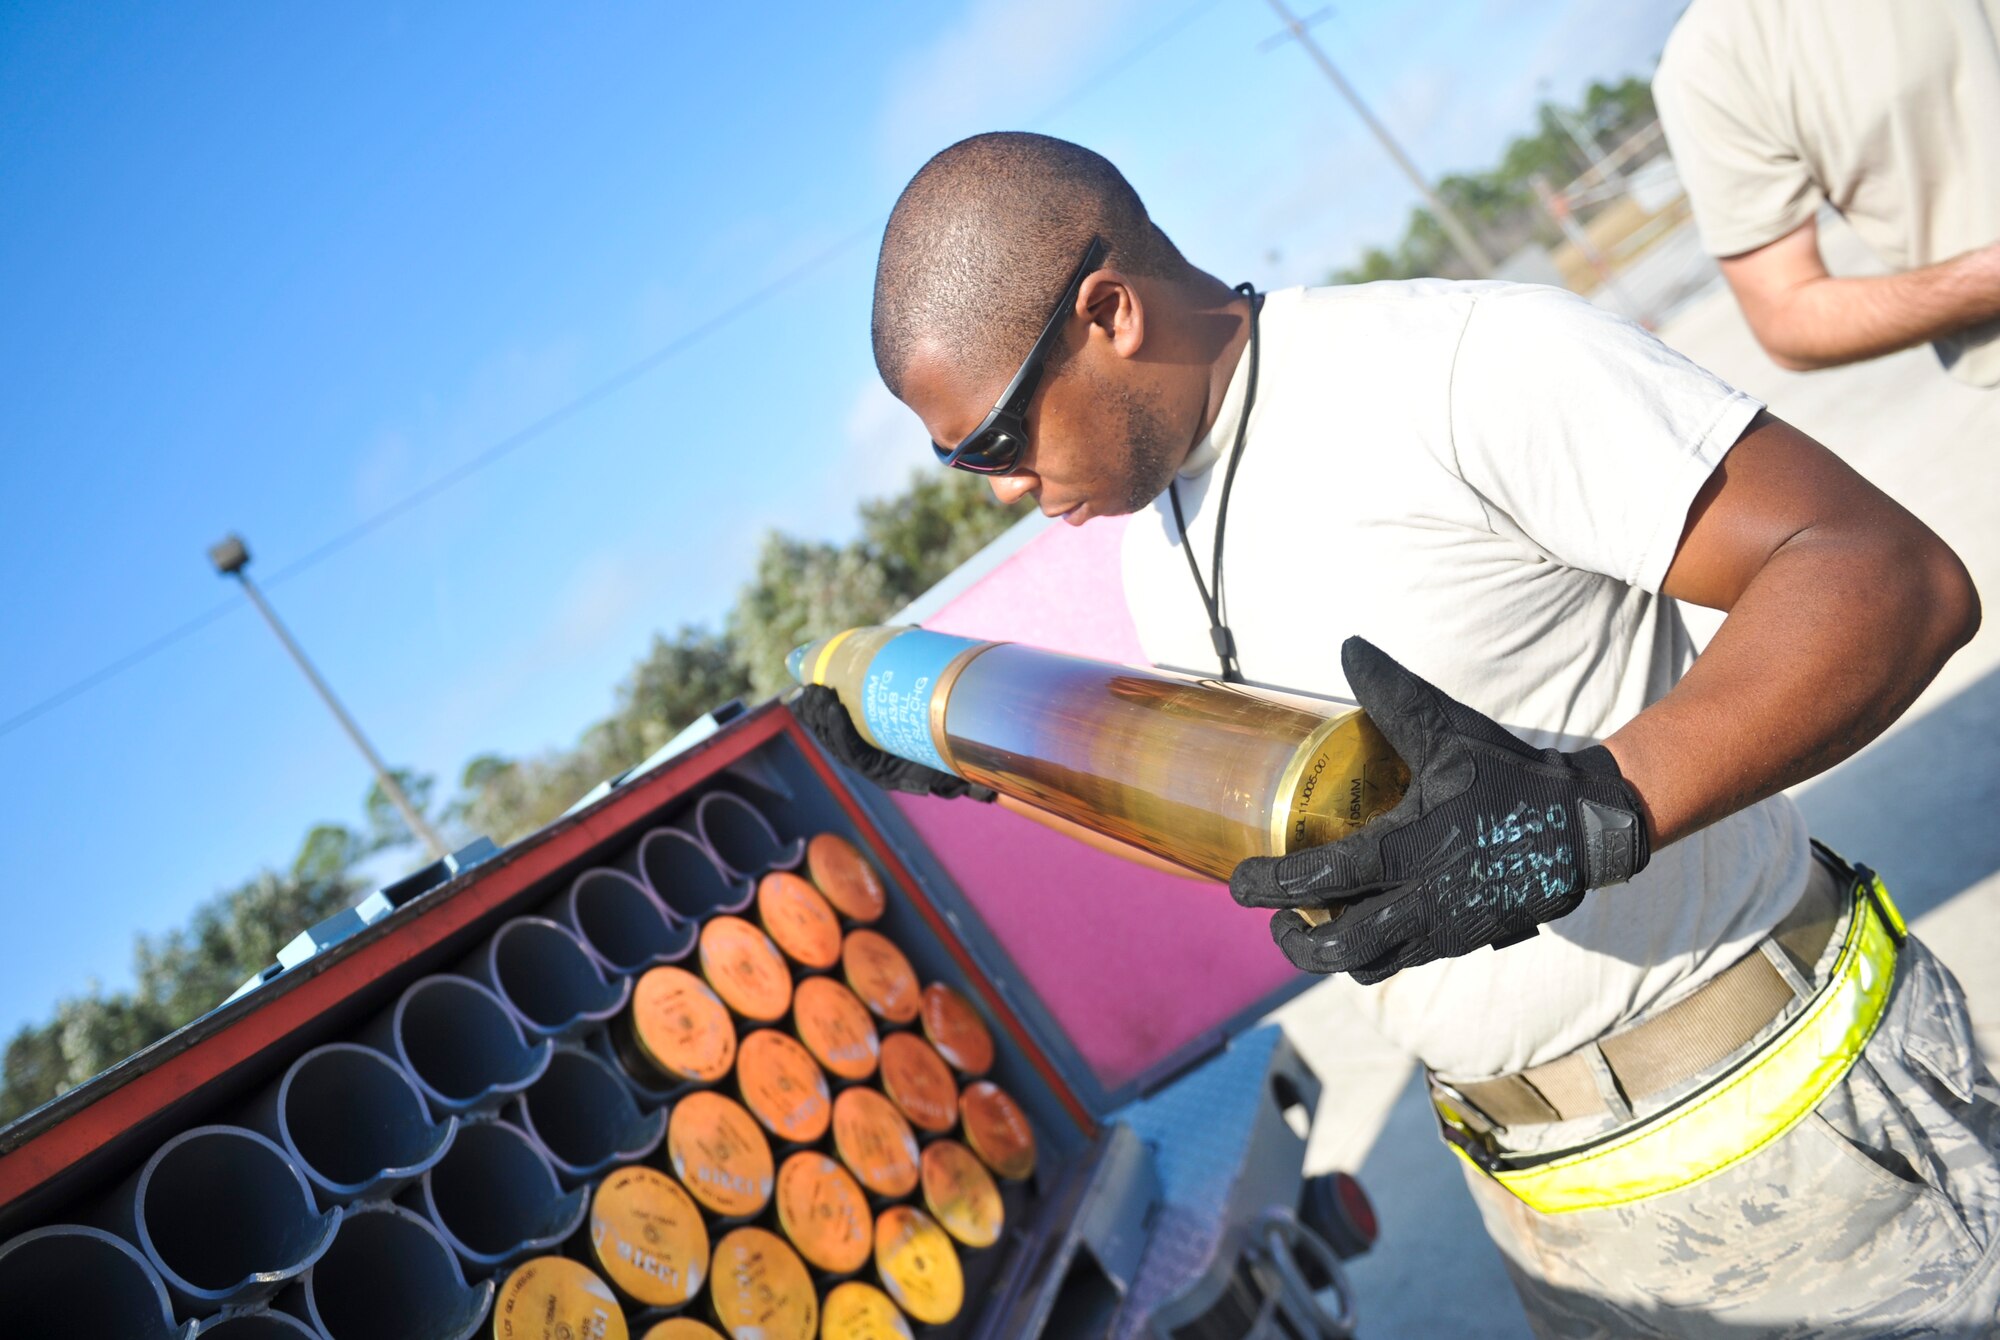 Senior Airman Marcus Montgomery, 1st Special Operations Equipment Maintenance Squadron munitions line delivery driver, inspects a 105mm round on Hurlburt Field, Fla., Dec. 6, 2013. Montgomery inspected each round and transported them to an aircraft once they were deemed undamaged and safe to load. (U.S. Air Force photo/Staff Sgt. John Bainter)